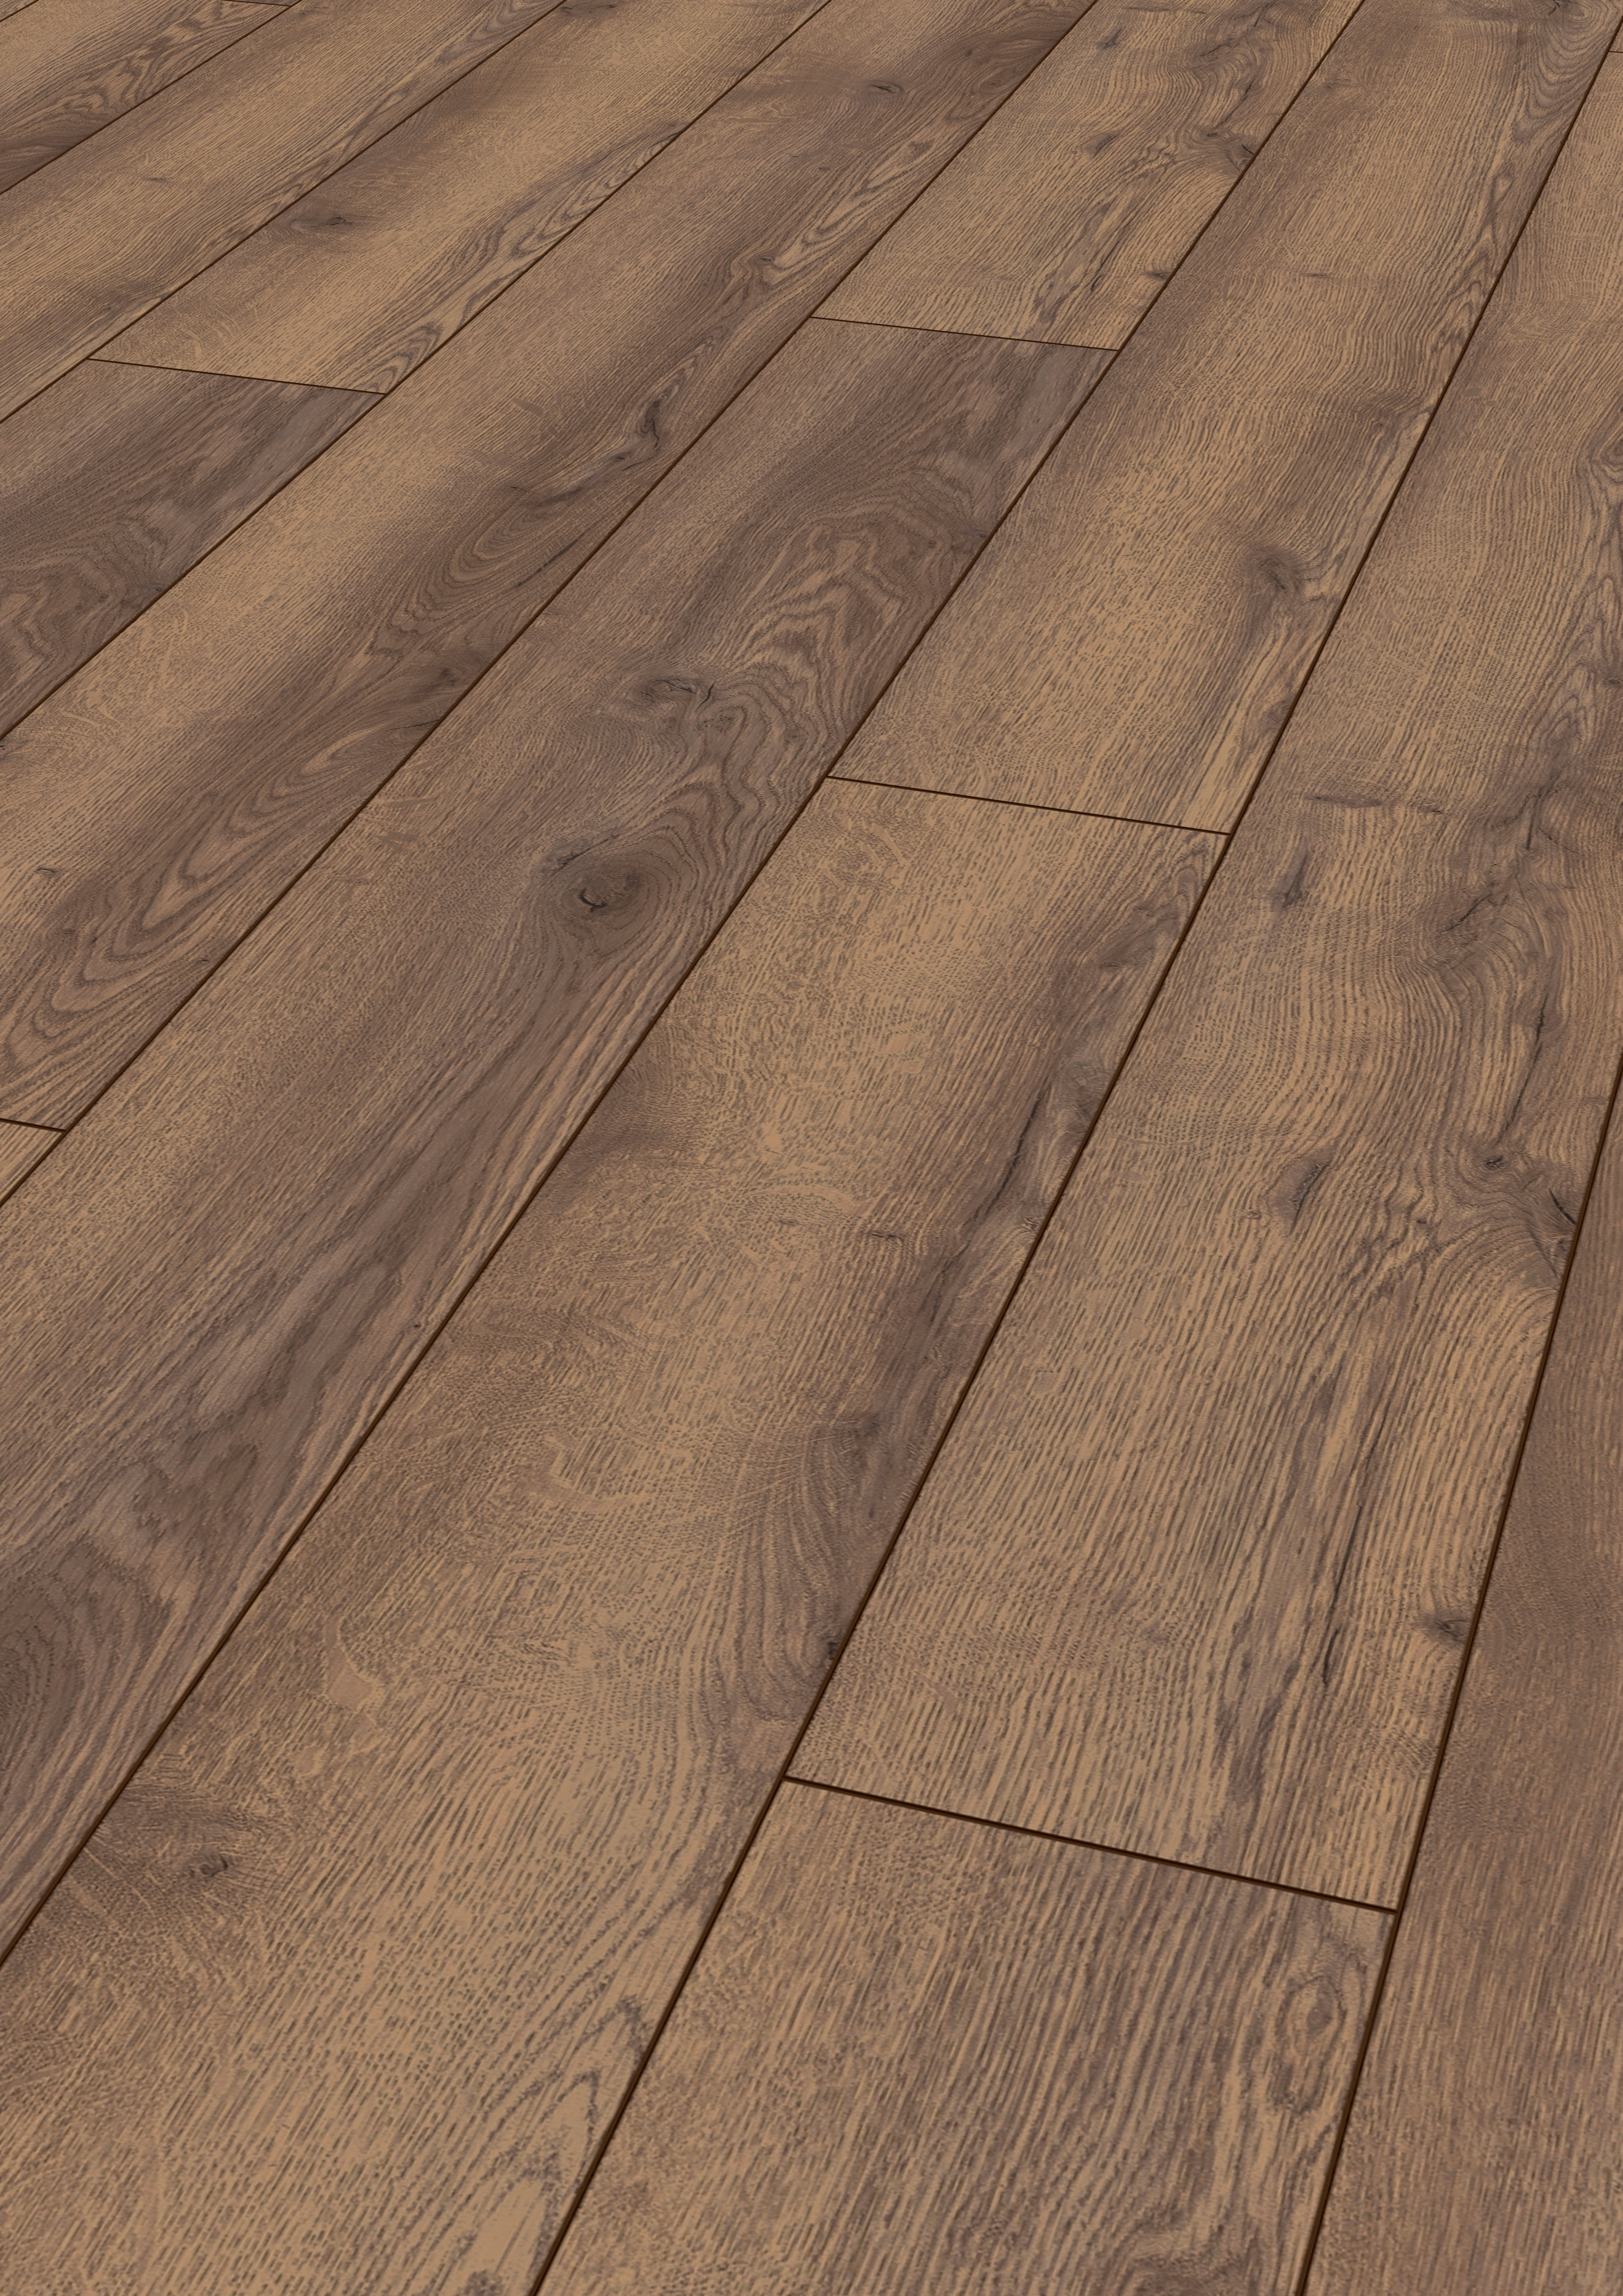 superior hardwood flooring reviews of mammut laminate flooring in country house plank style kronotex pertaining to download picture amp